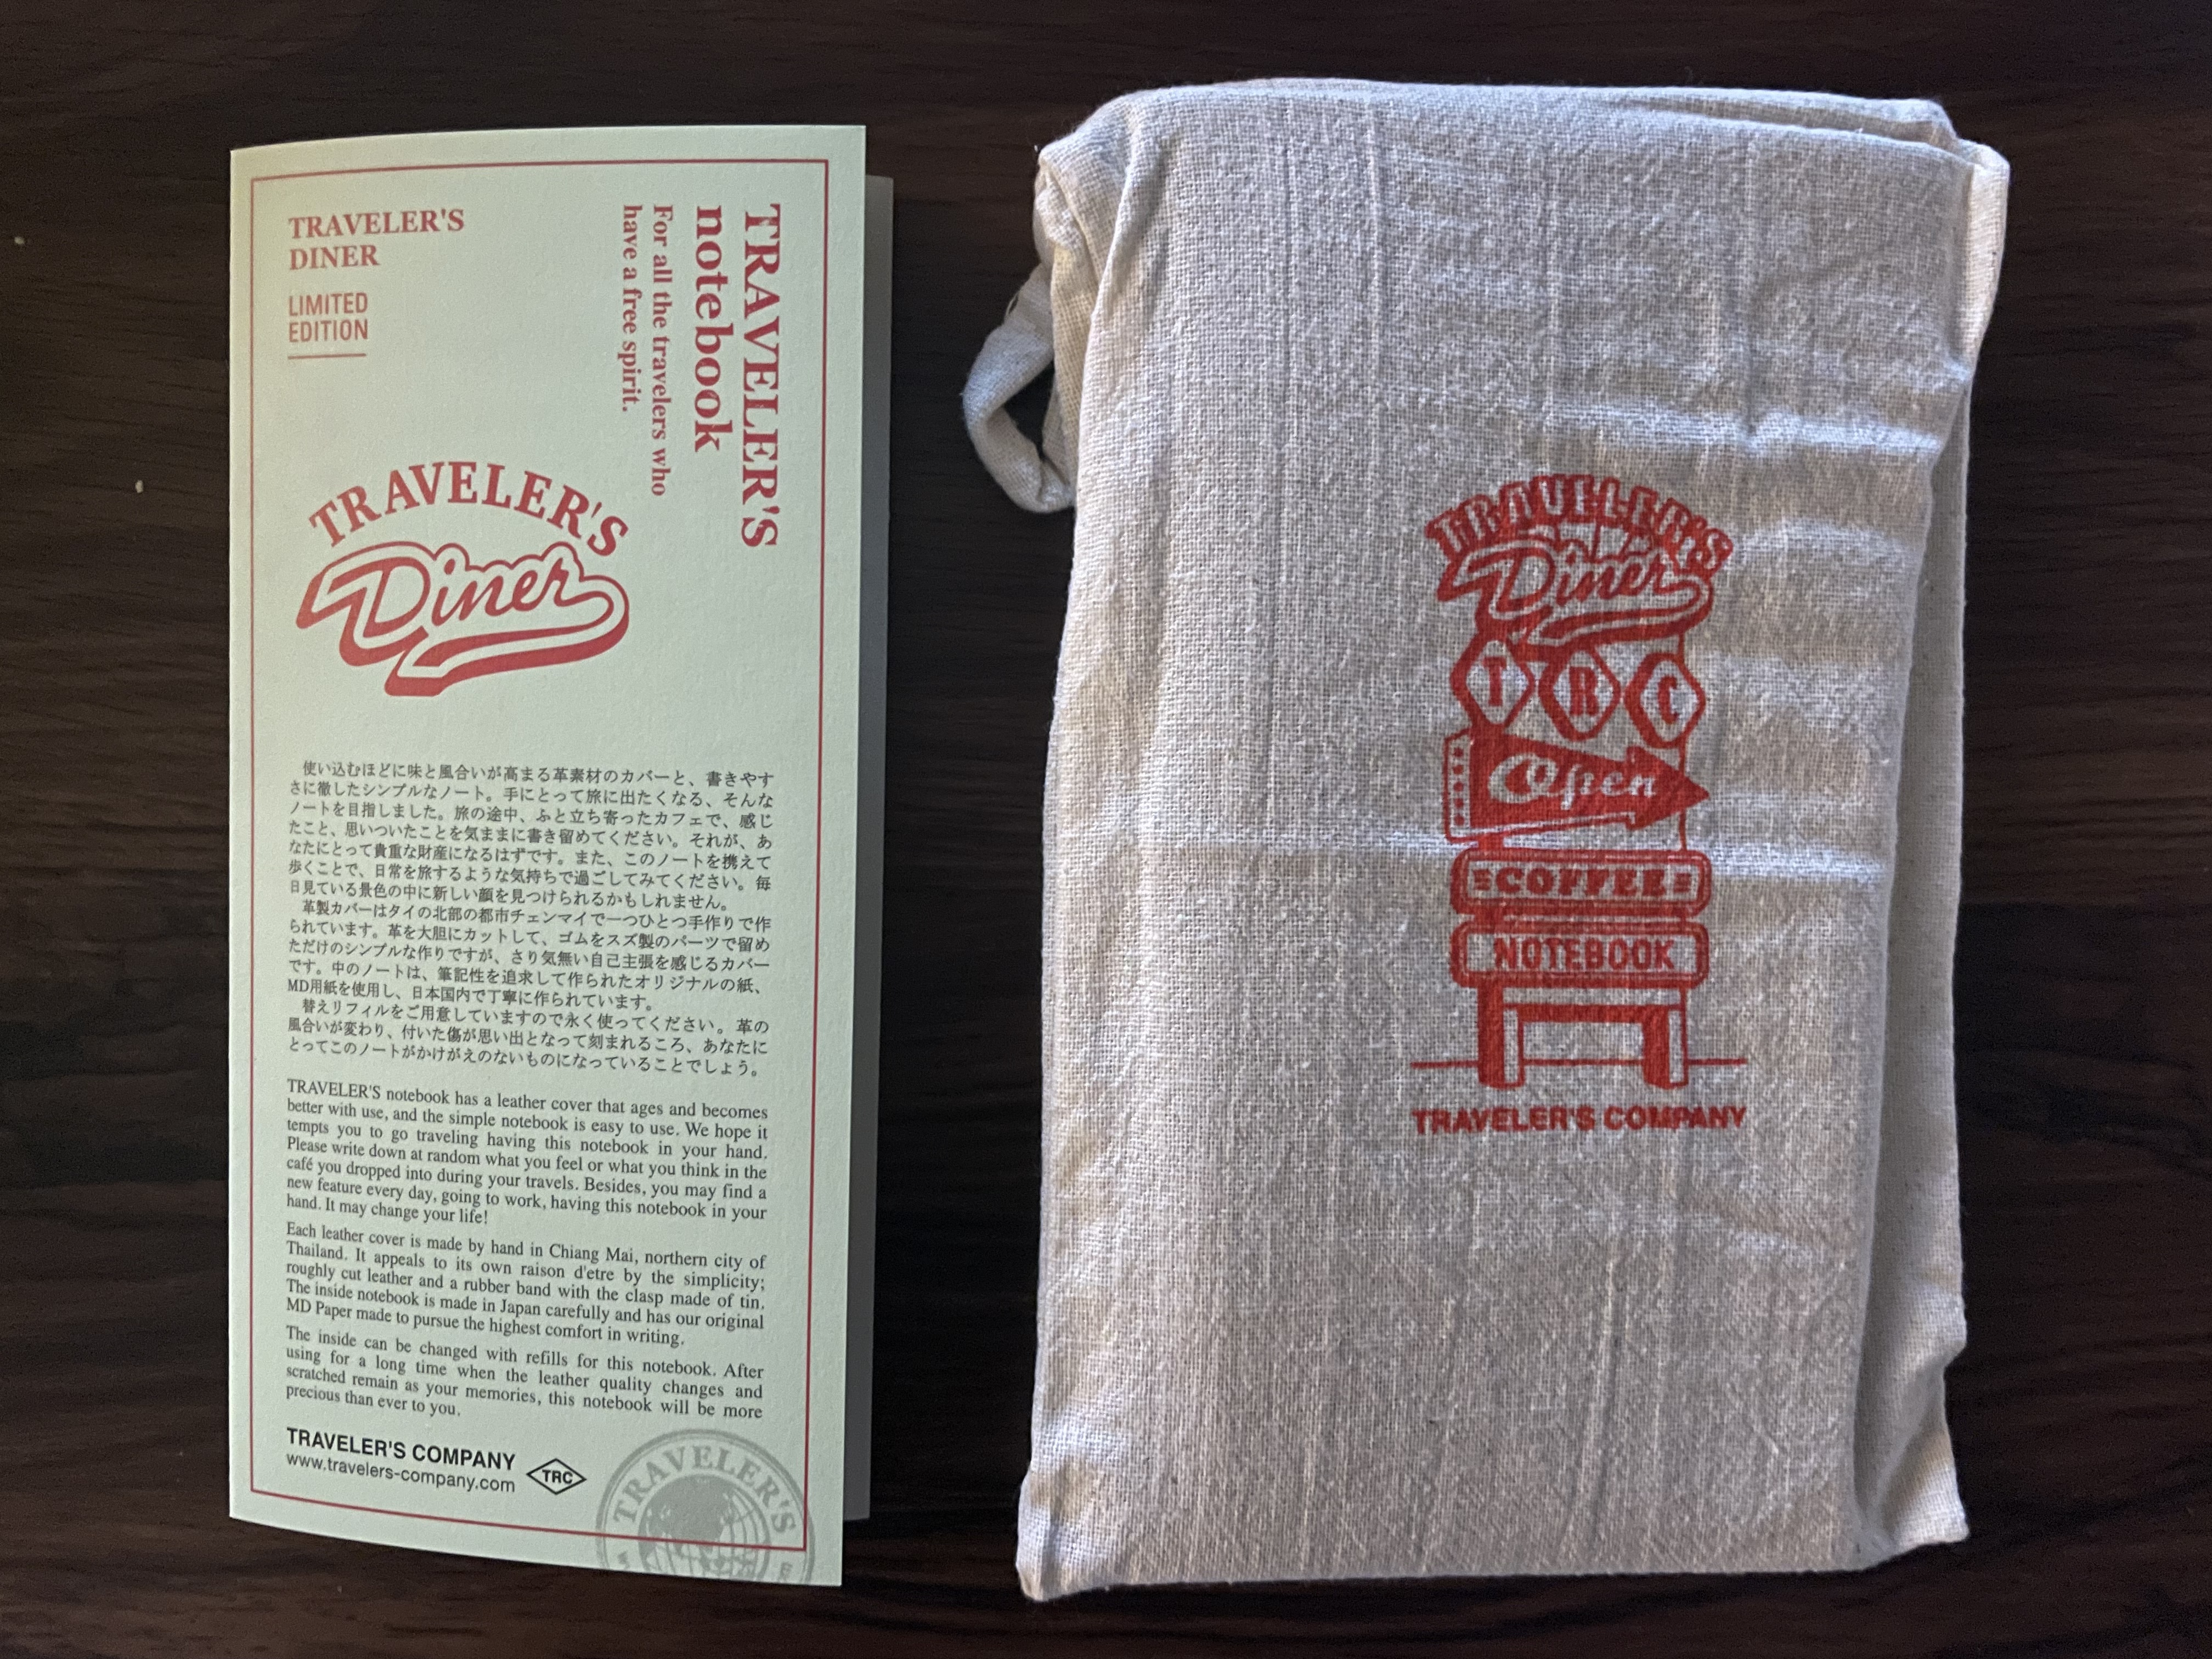 the pamphlet mentioned earlier side by side with the traveler's notebook kept in a cloth bag emblazoned with the traveler's diner design